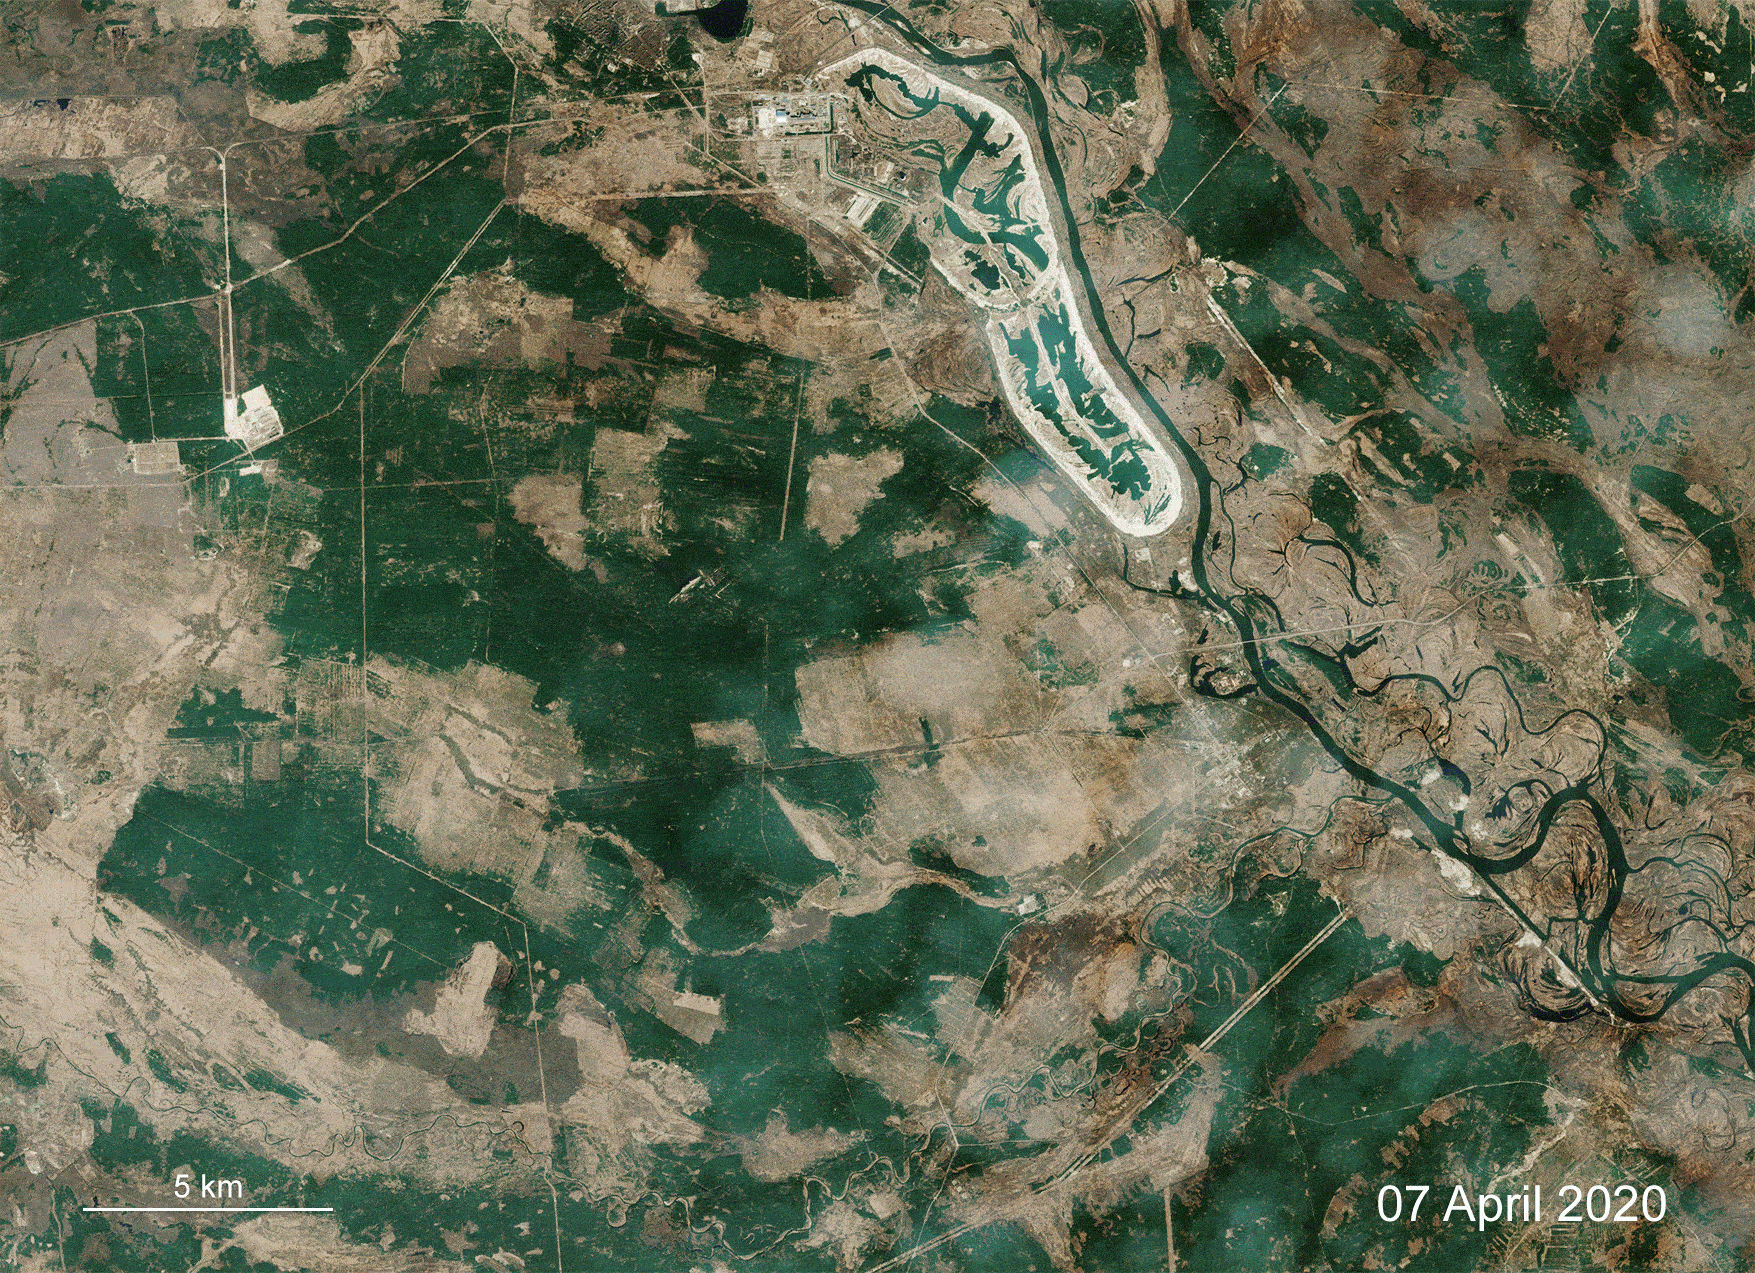 GIF showing the progress of the Chernobyl wildfires from space.